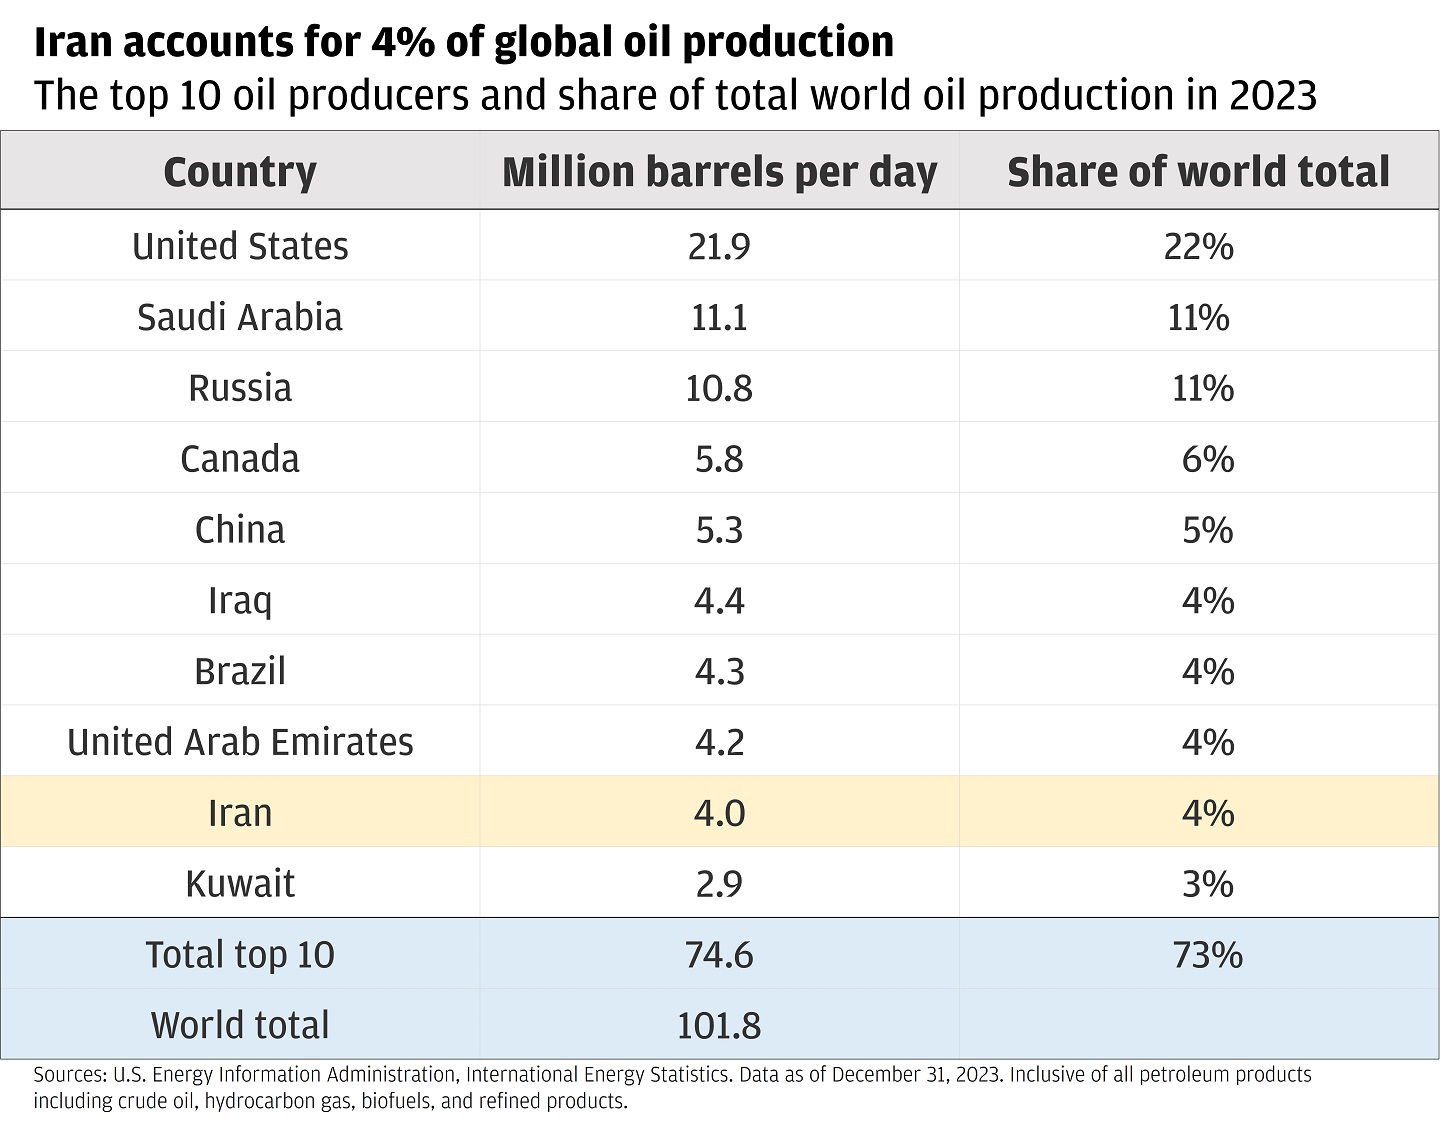 This table shows the top 10 oil producers and share of total world oil production in 2023.